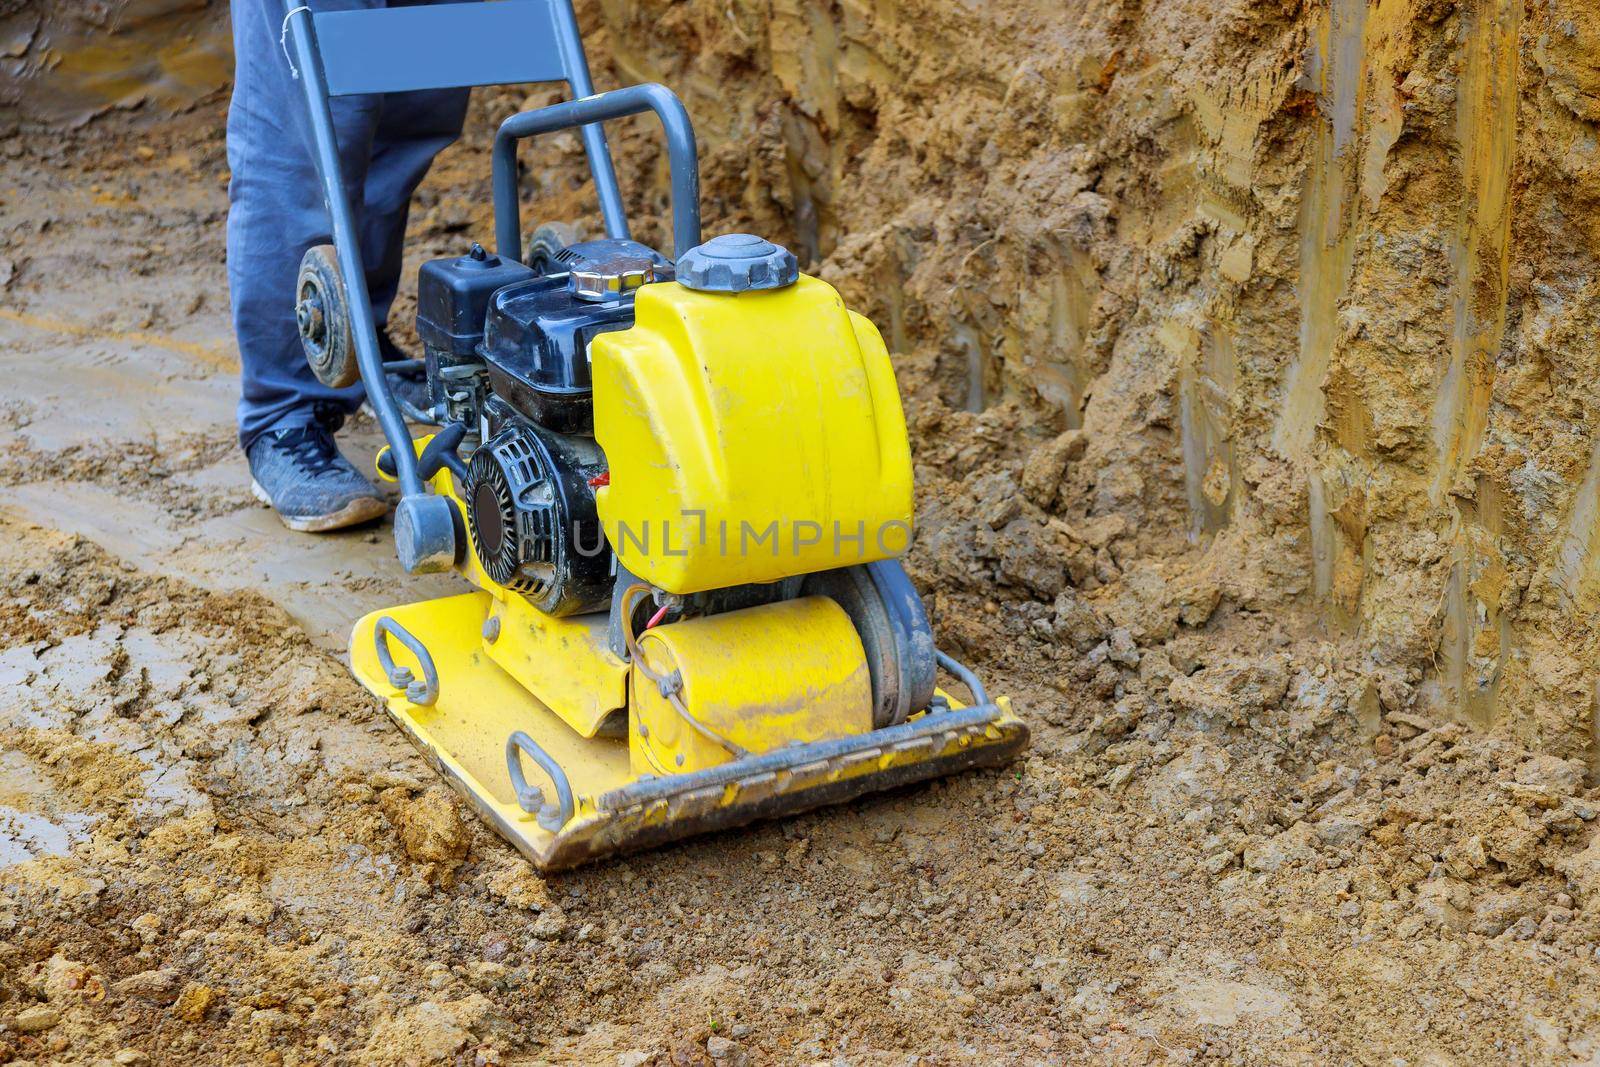 Construction machinery for soil compactor during construction site work.